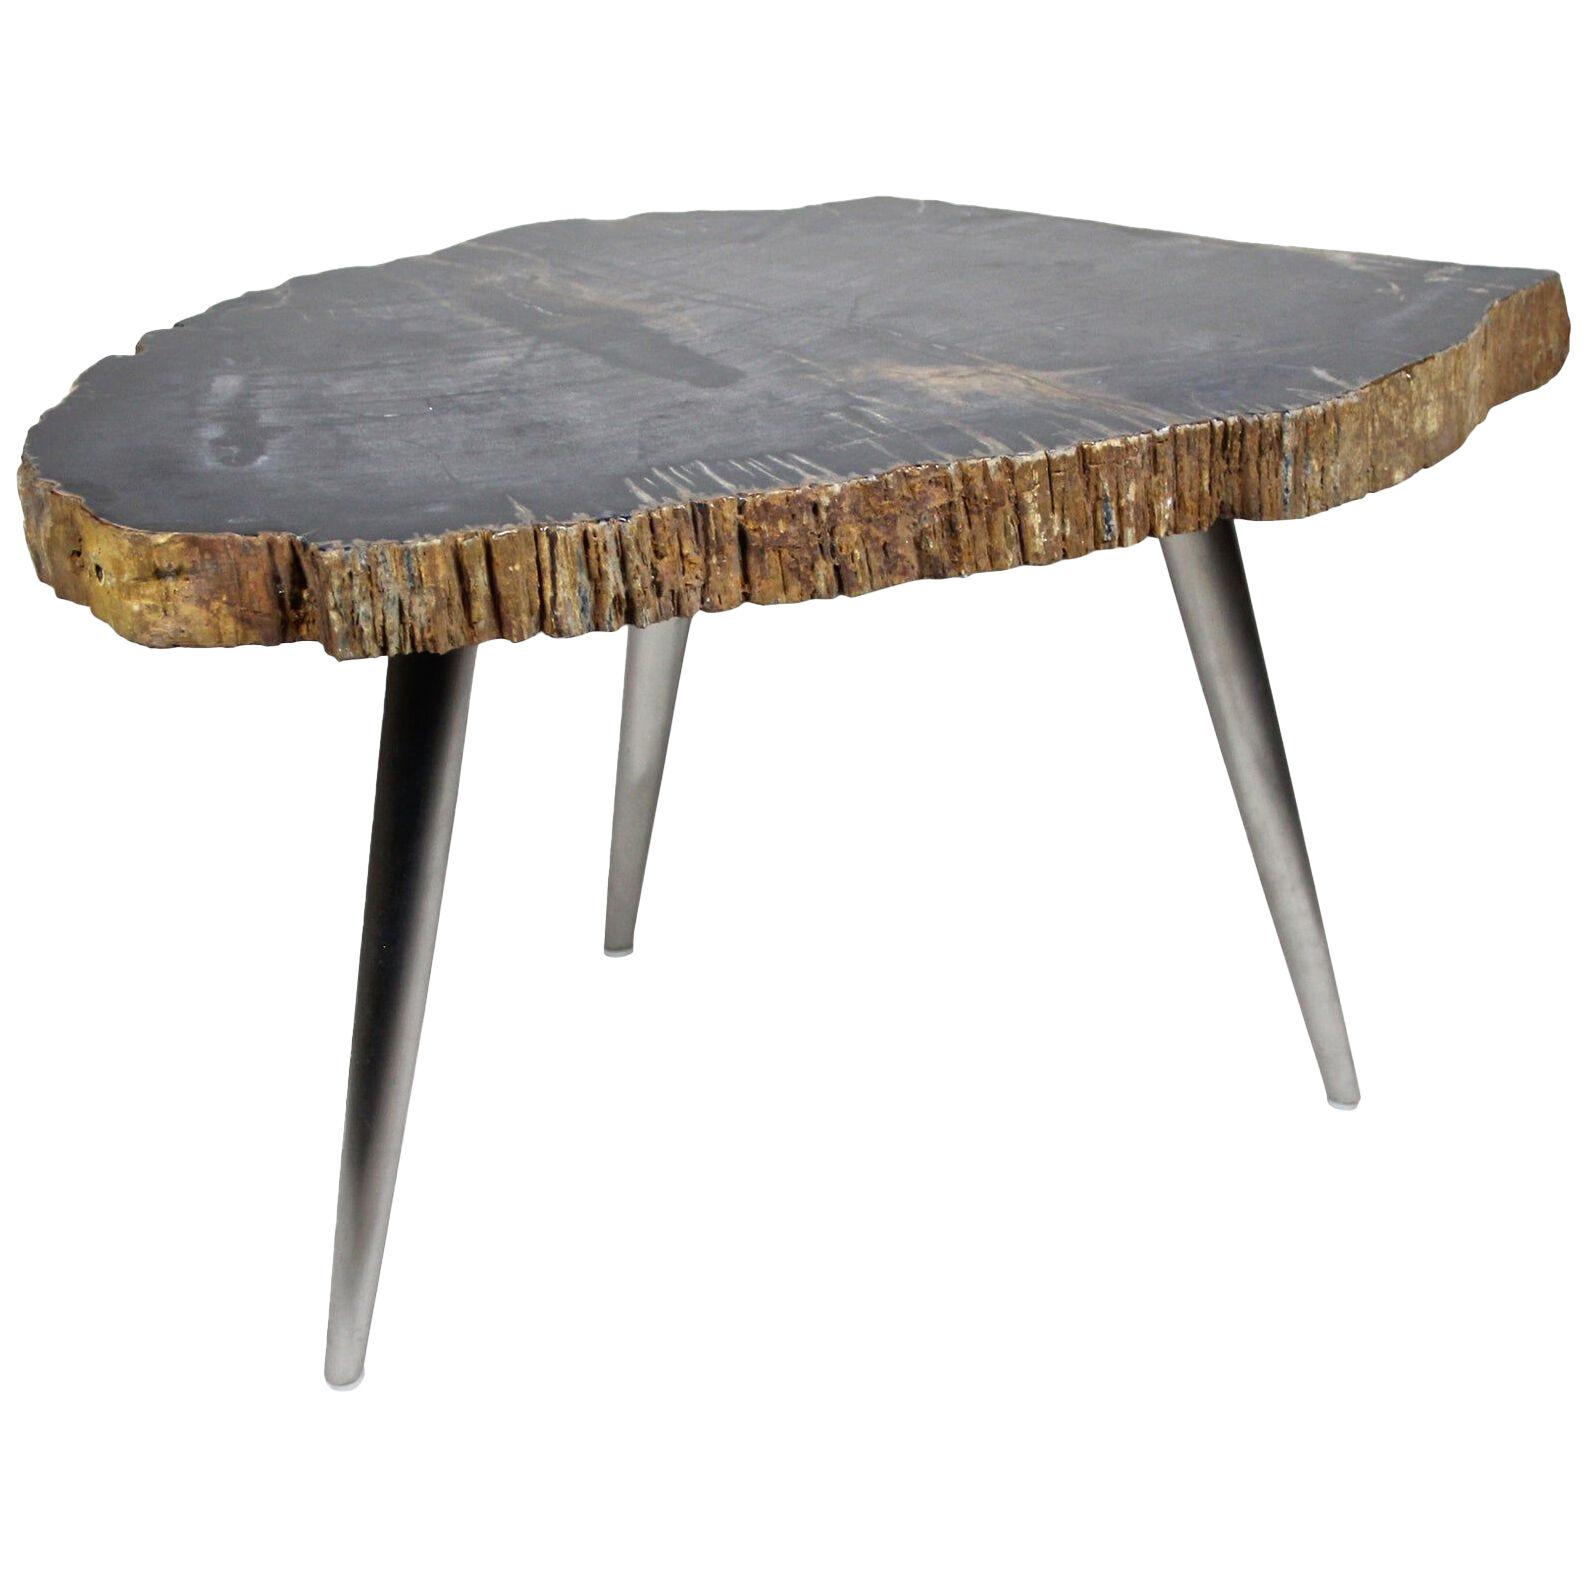 Petrified Wood Coffee Table or Side Table with Stainless Steel Feet	